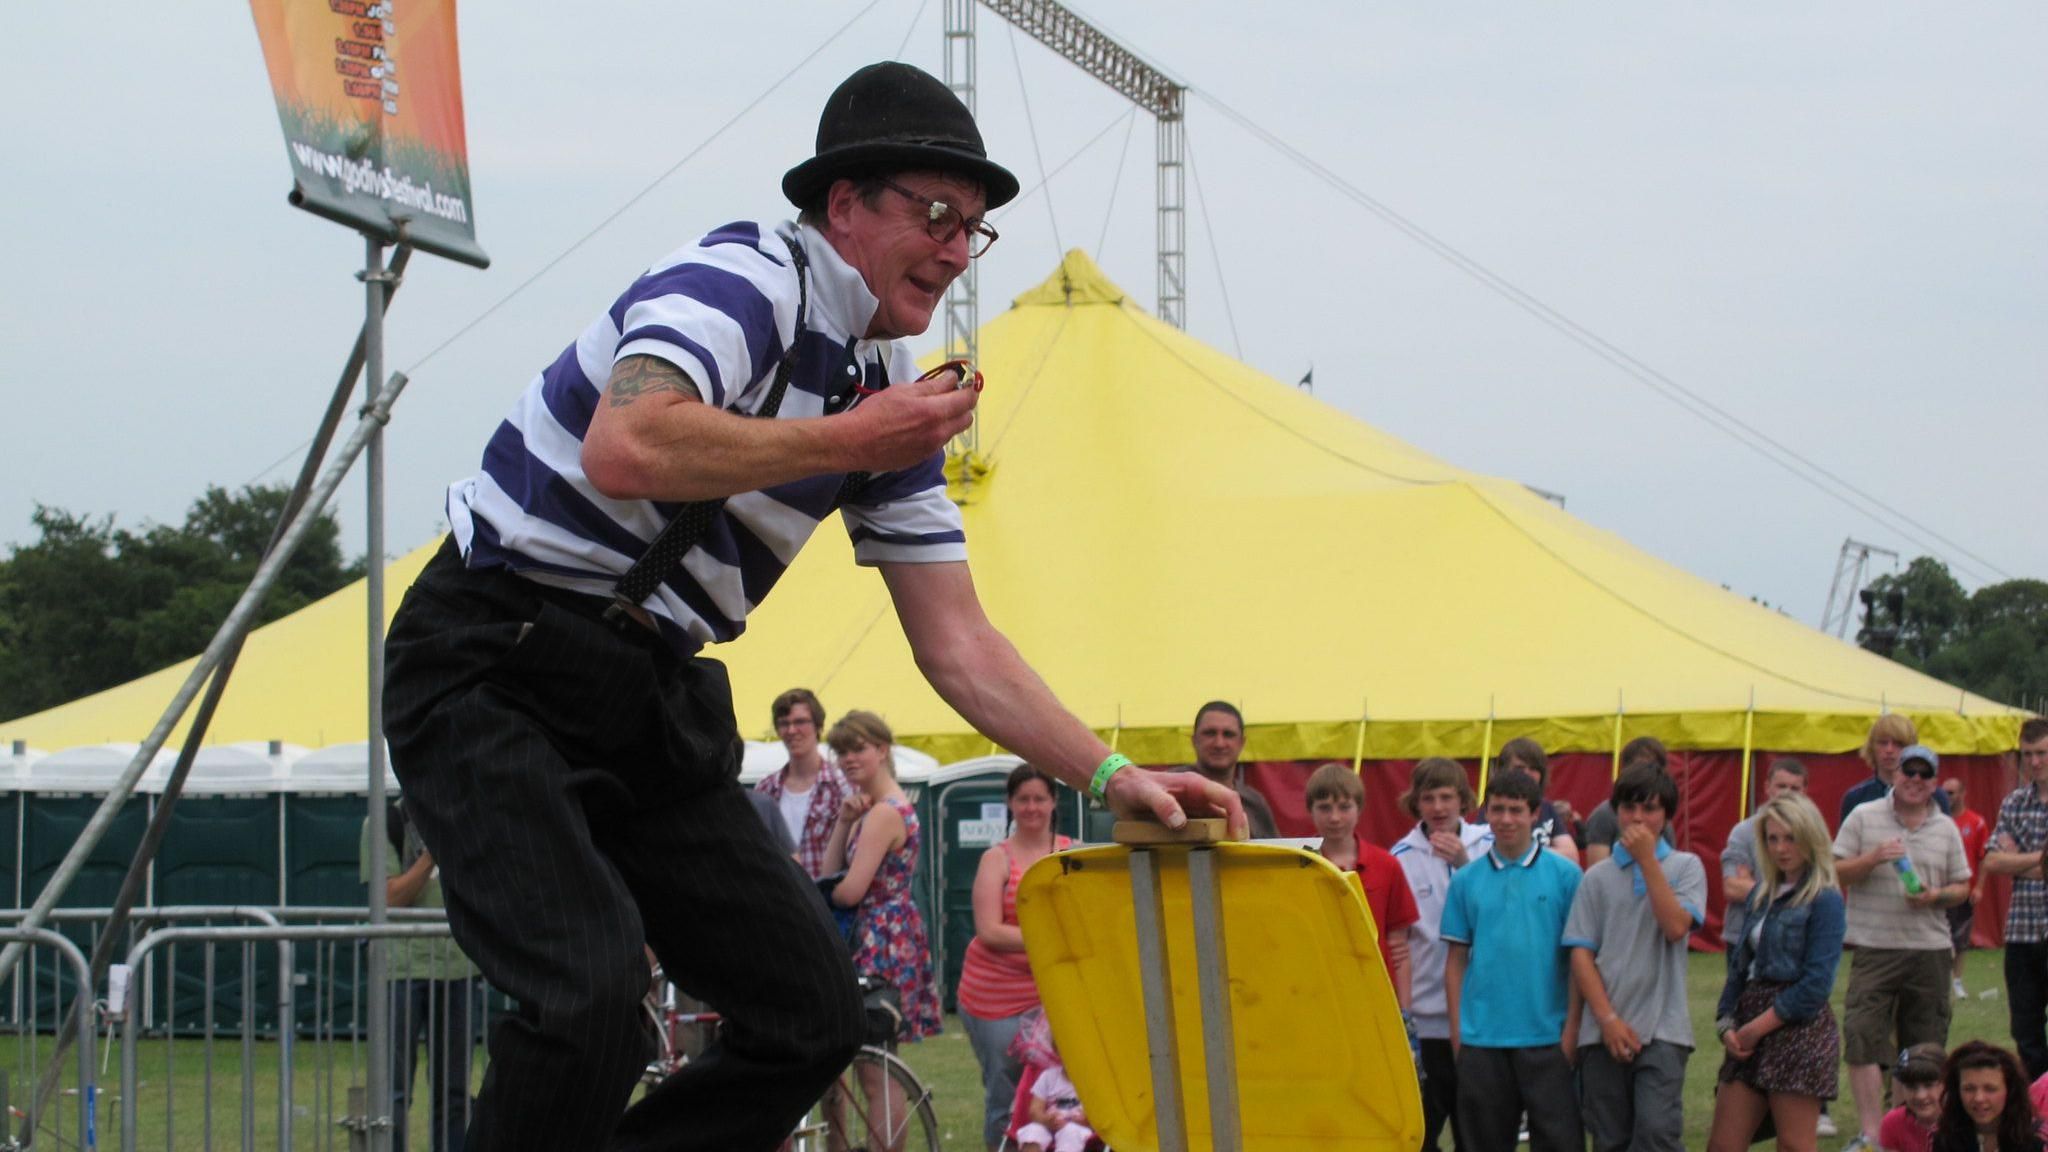 A clown at the festival in 2019. He is leaning forwards while his left hand is leaning on a yellow plastic square which appears to be anchored to the ground. He has a blue and white striped top with braces over the top connected to his black trousers, a black domed hat and glasses and is smiling. Behind him a small crowd can be seen including children and behind them is a large yellow tent